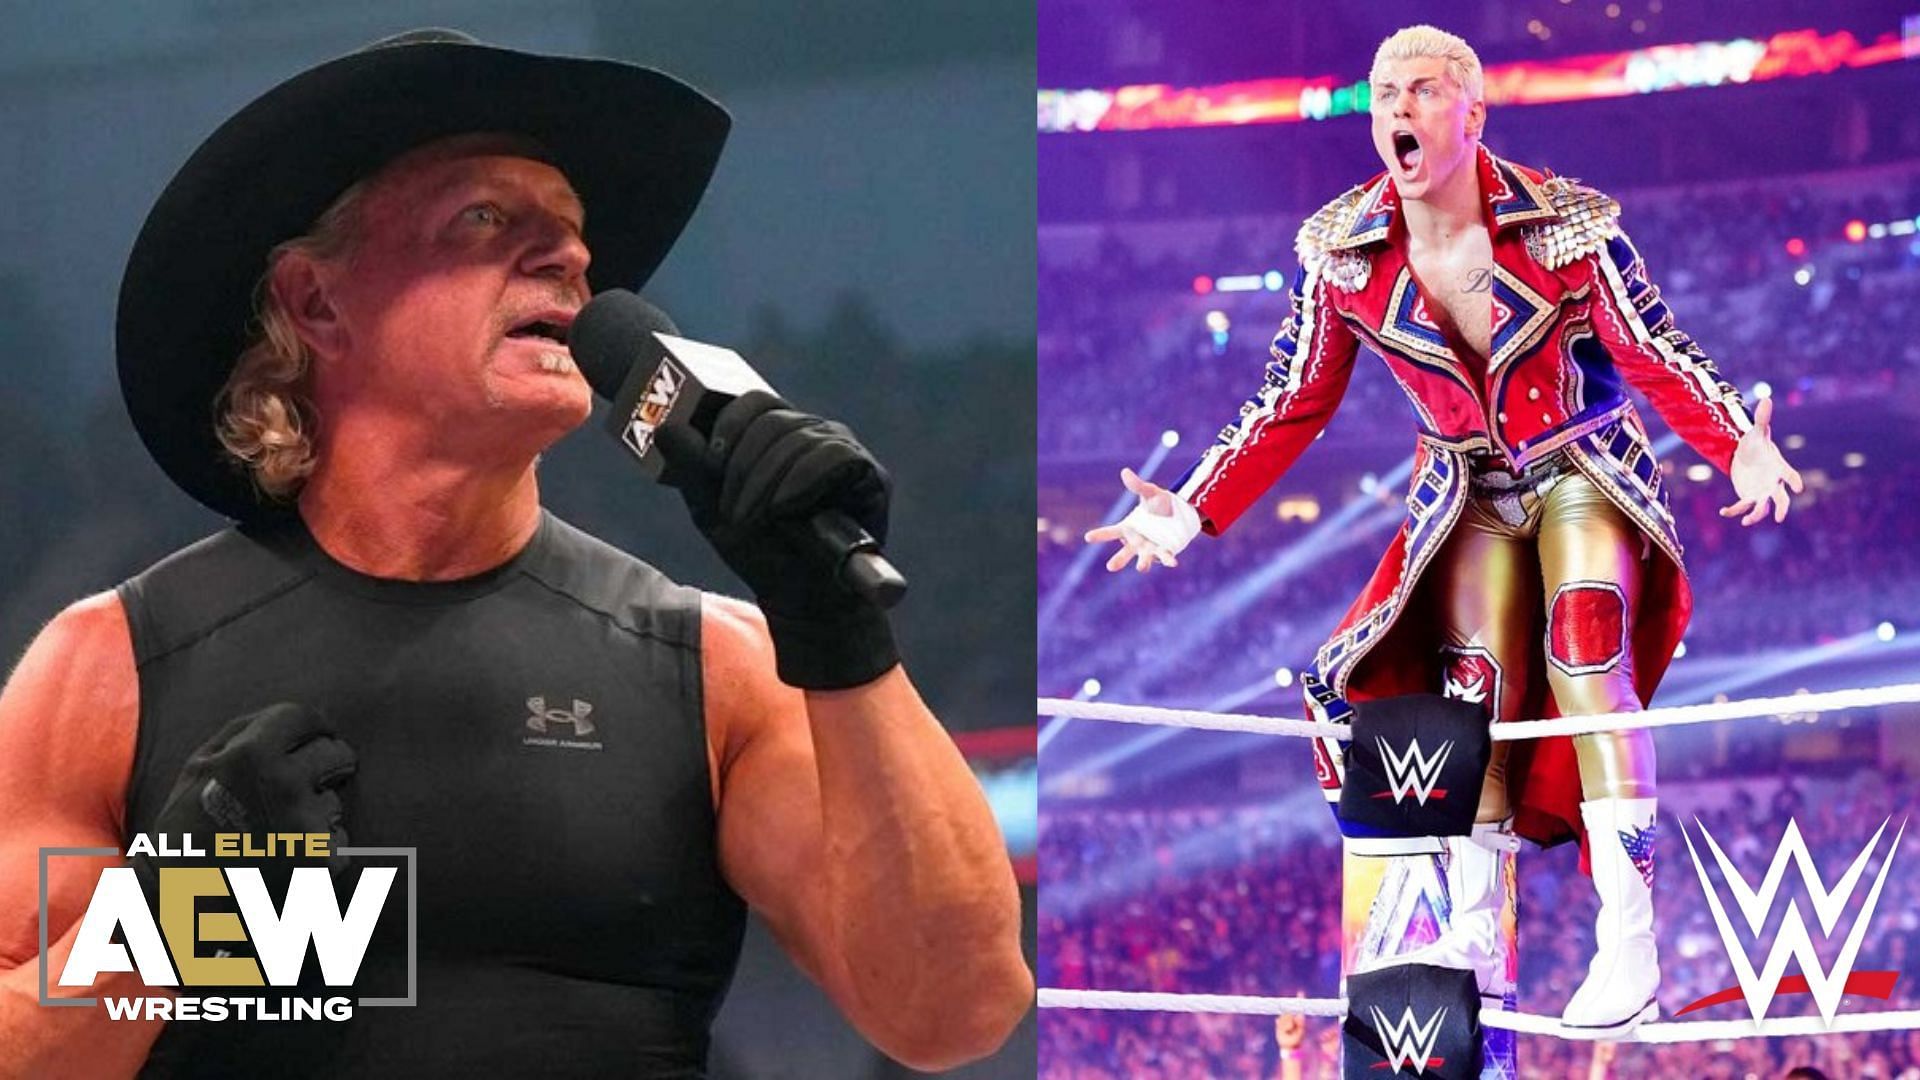 Both stars have appeared in WWE and AEW in 2022